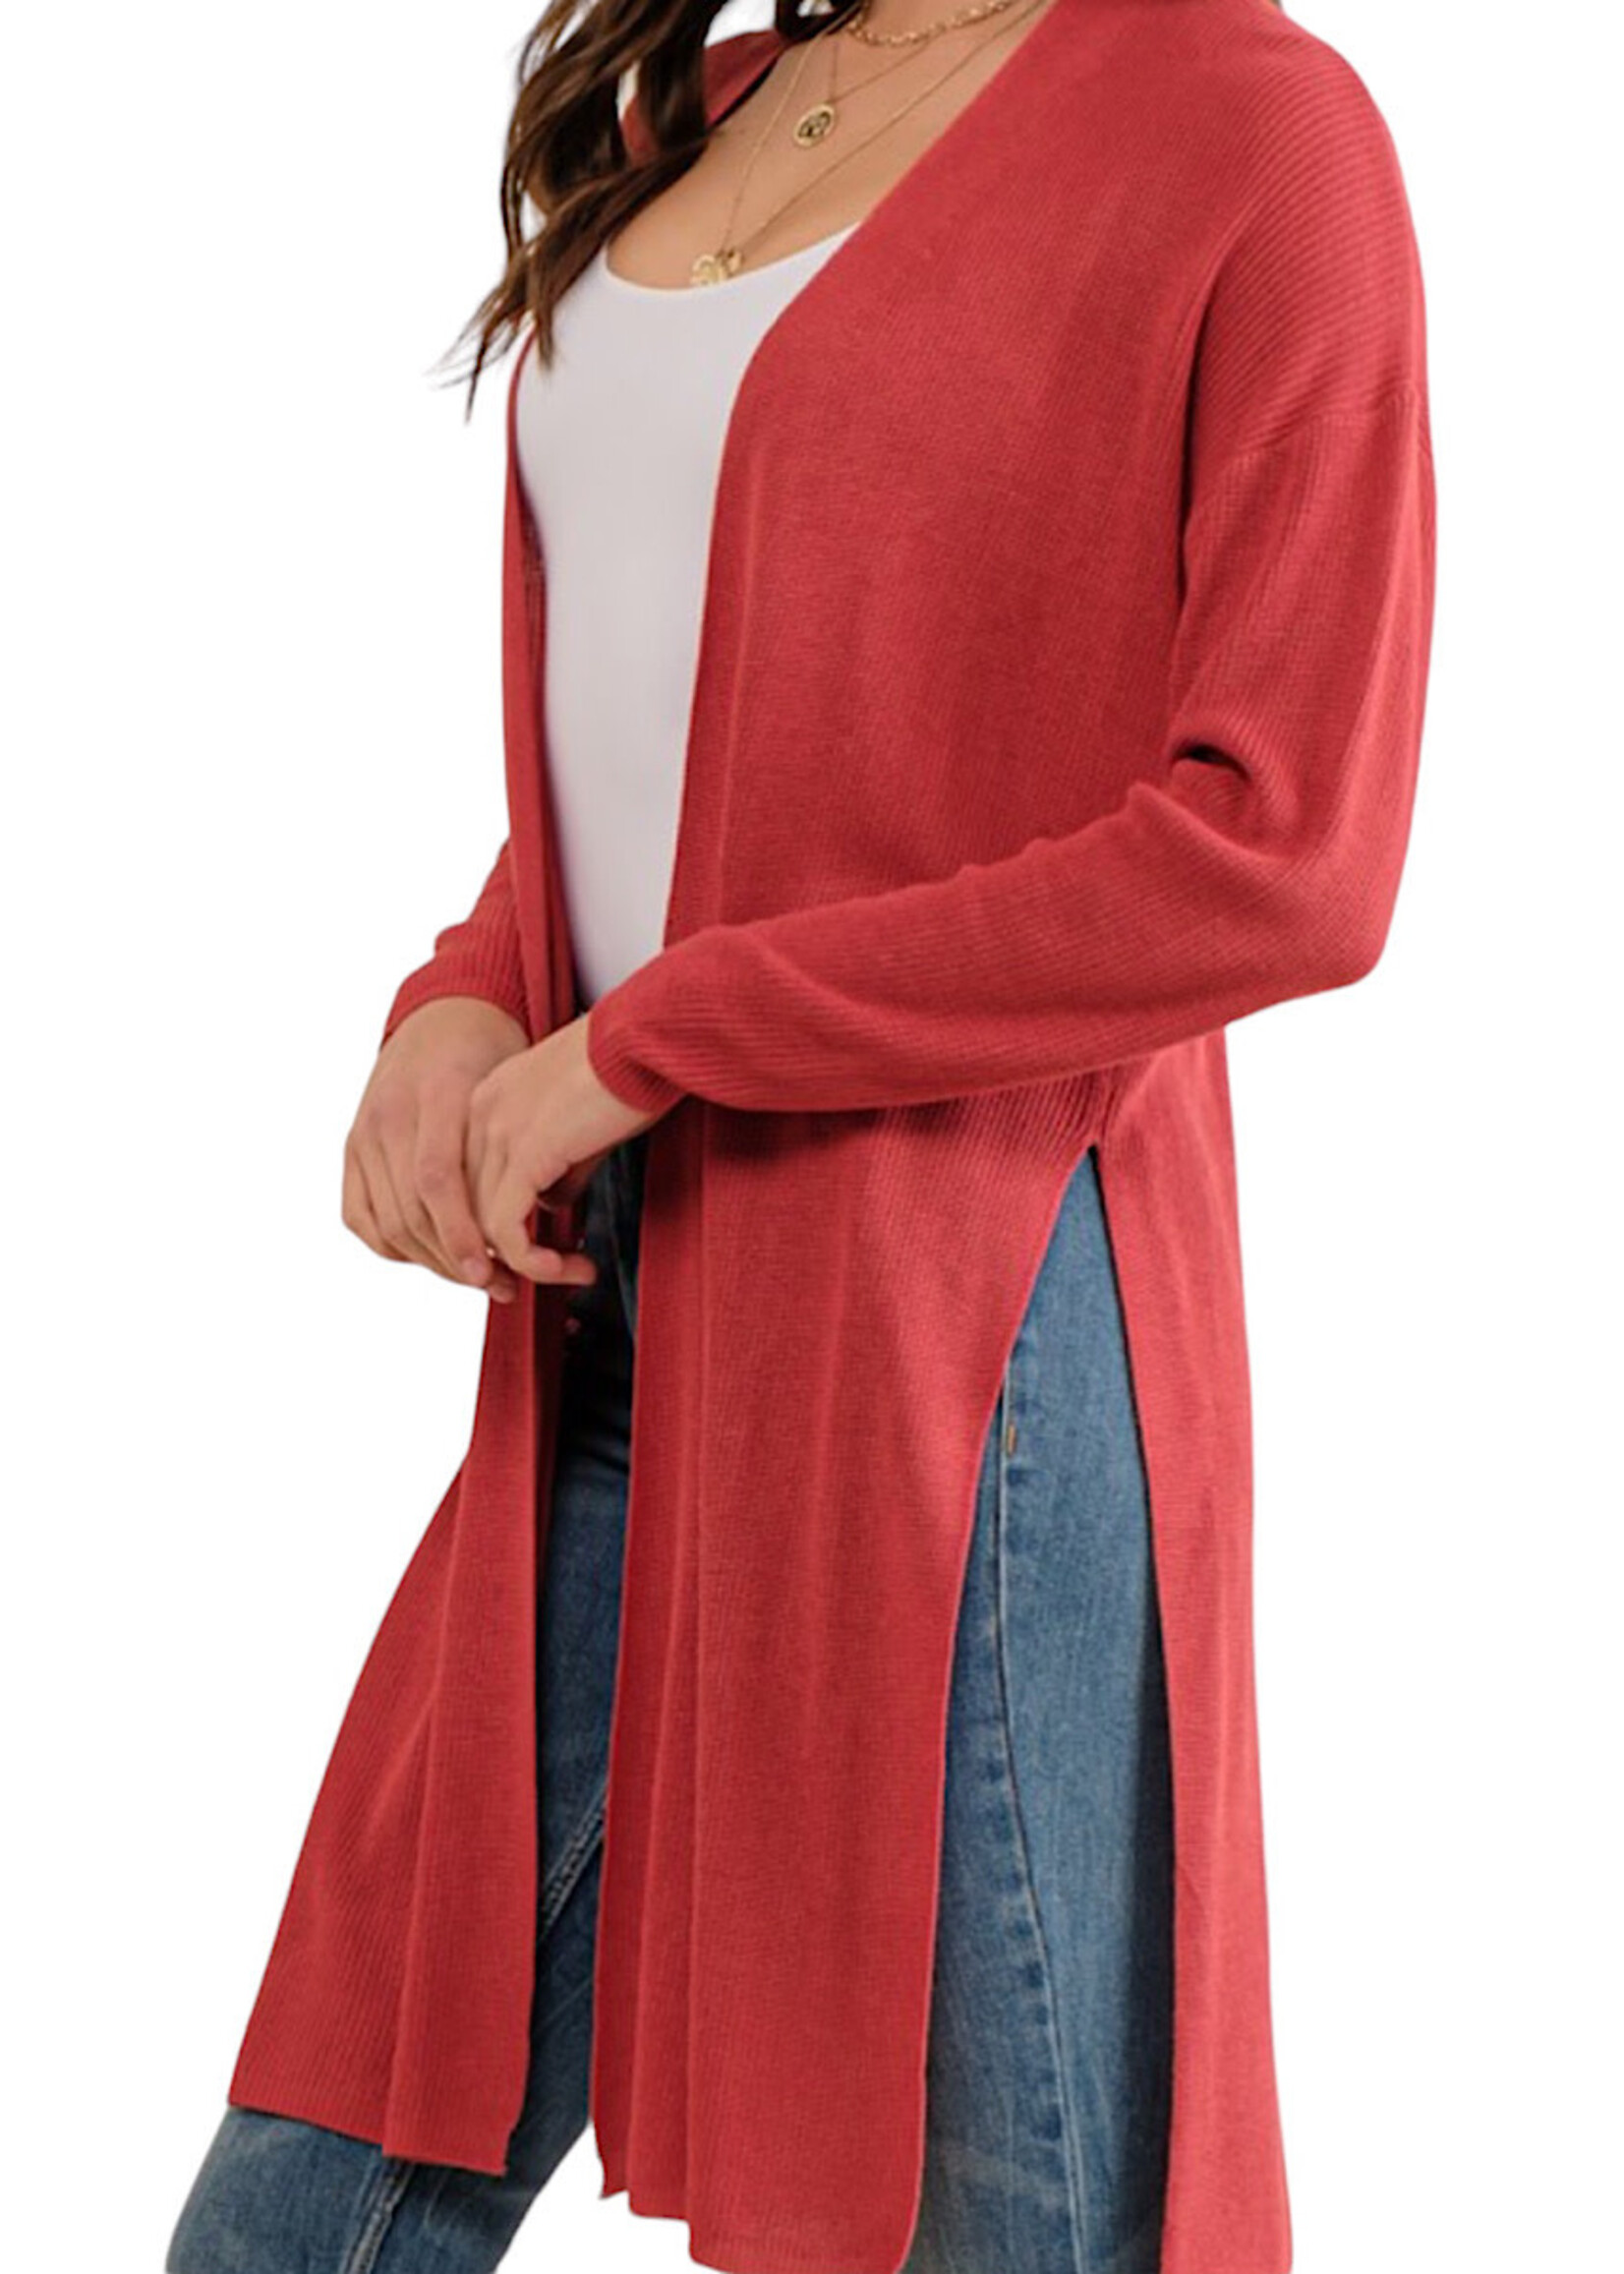 Coral Knit Cardigan with High Side Slit